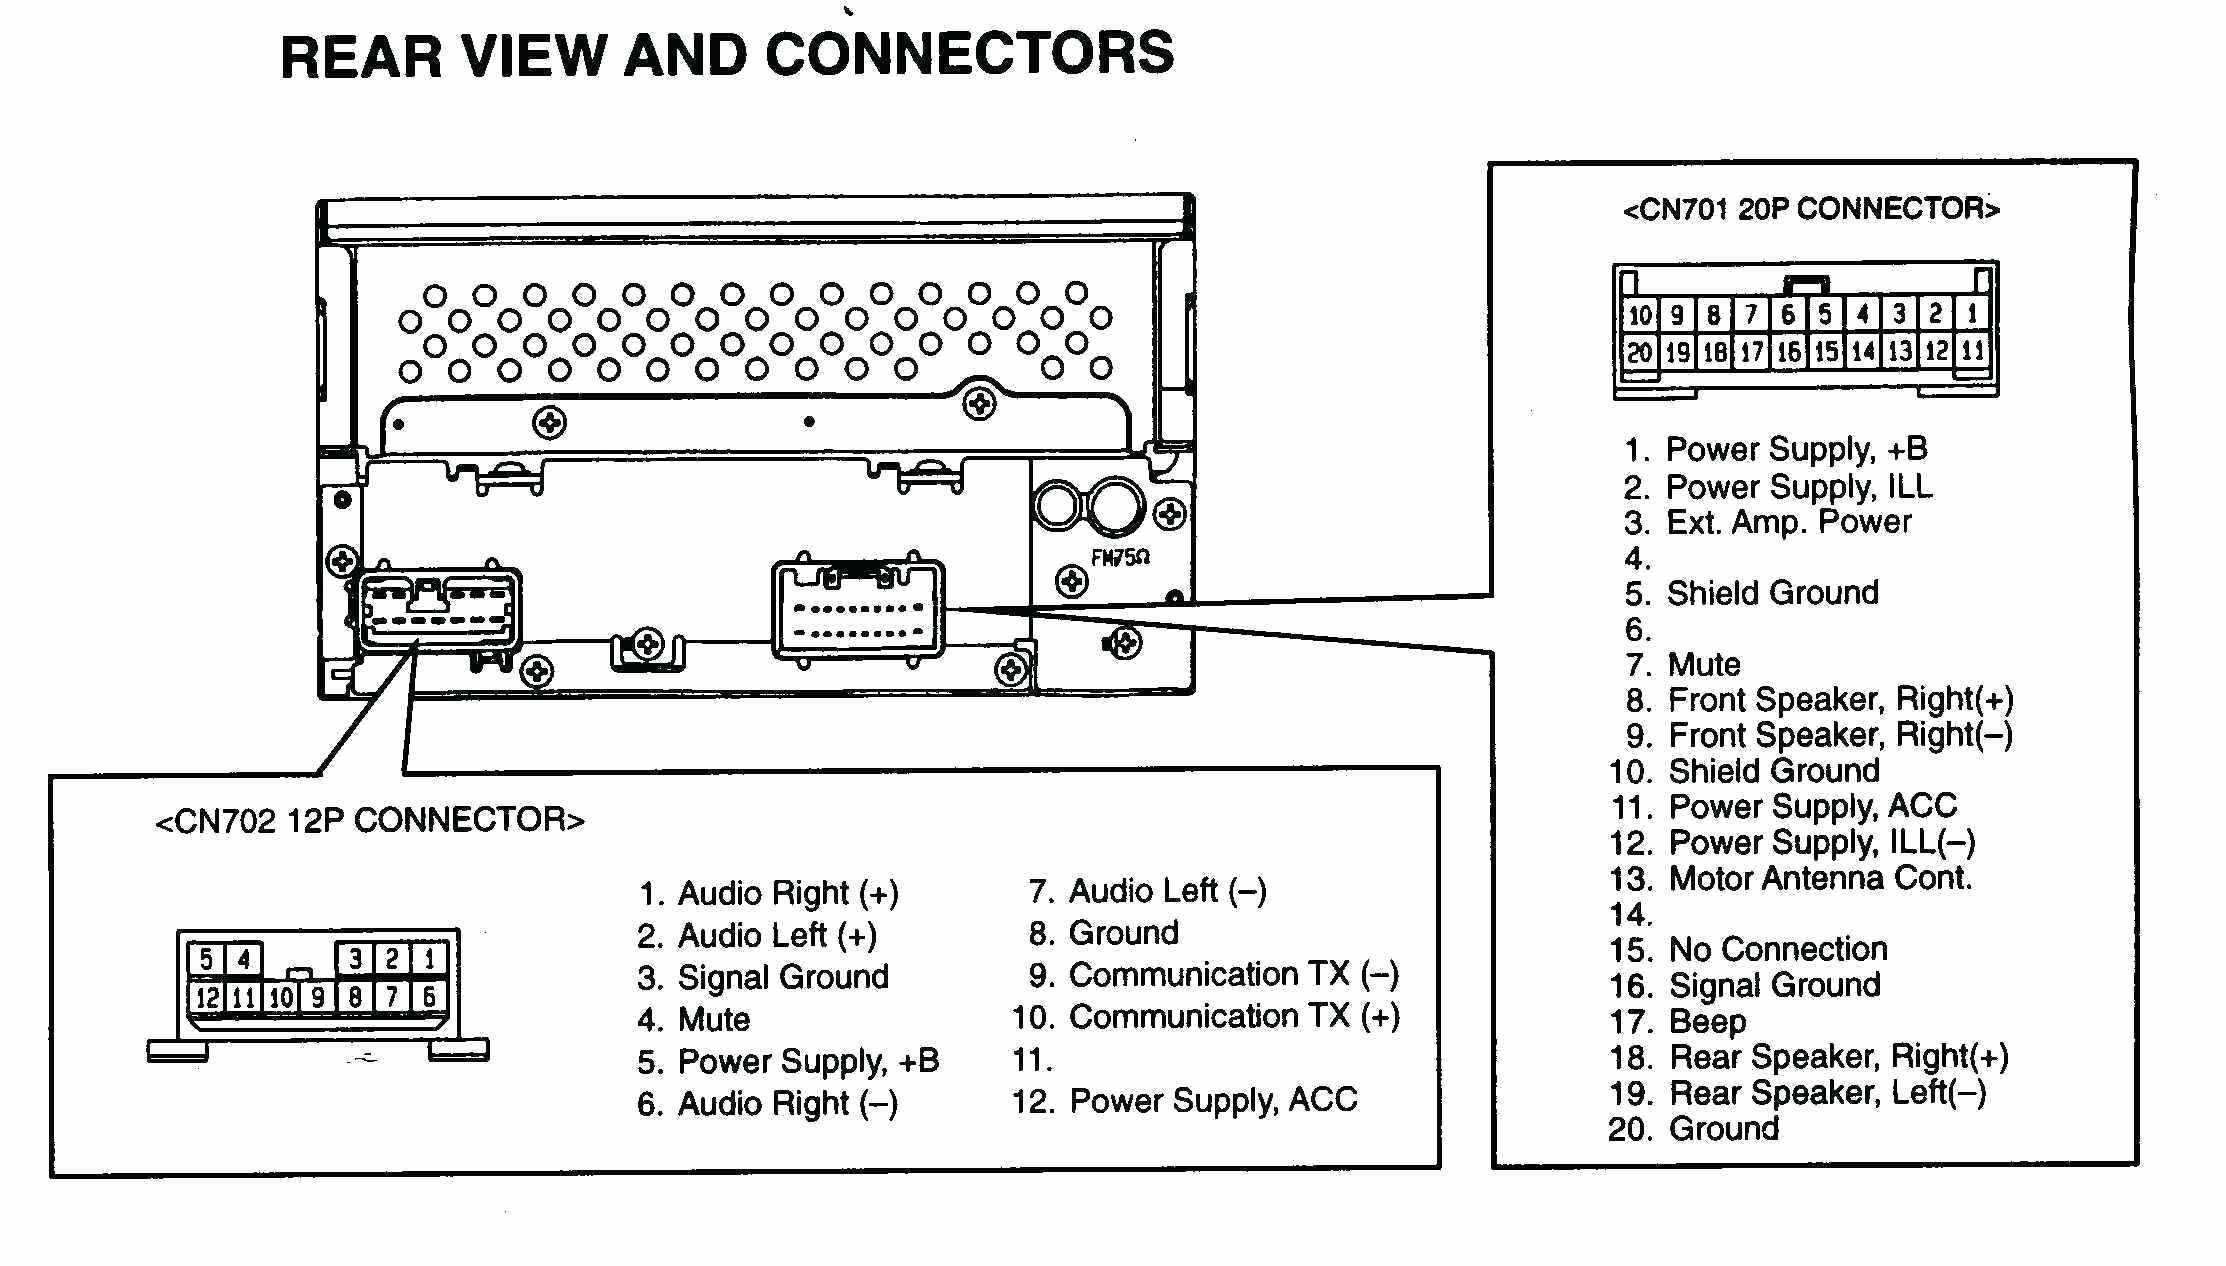 Home Audio Wiring Diagram New Stereo Wiring Diagram Diagram Of Home Audio Wiring Diagram